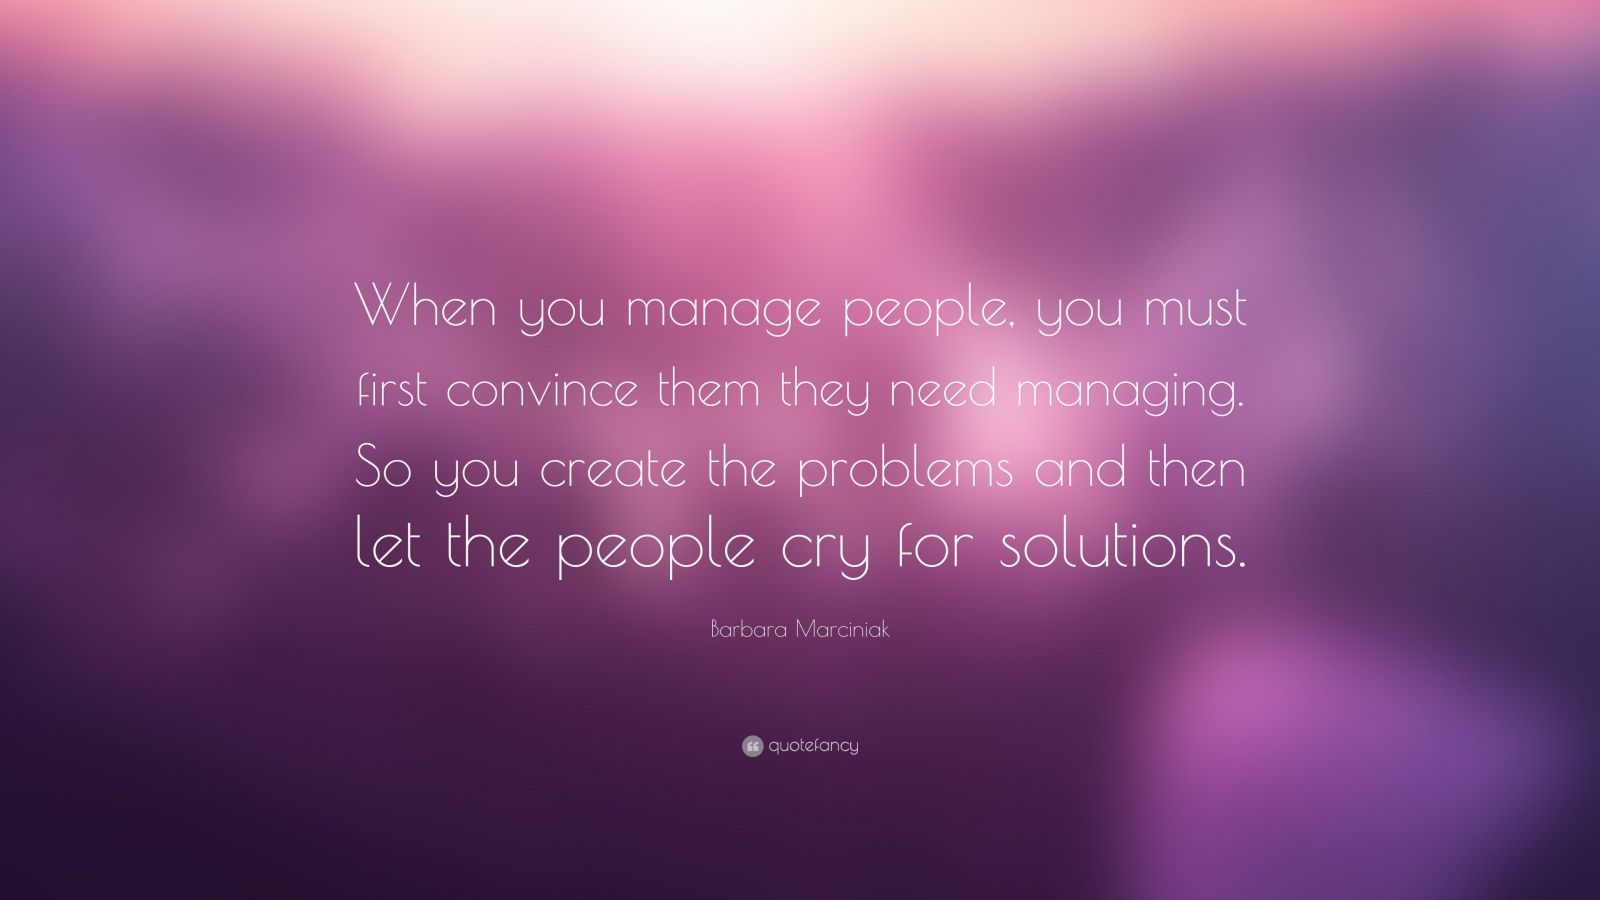 Barbara Marciniak Quote: “When you manage people, you must first